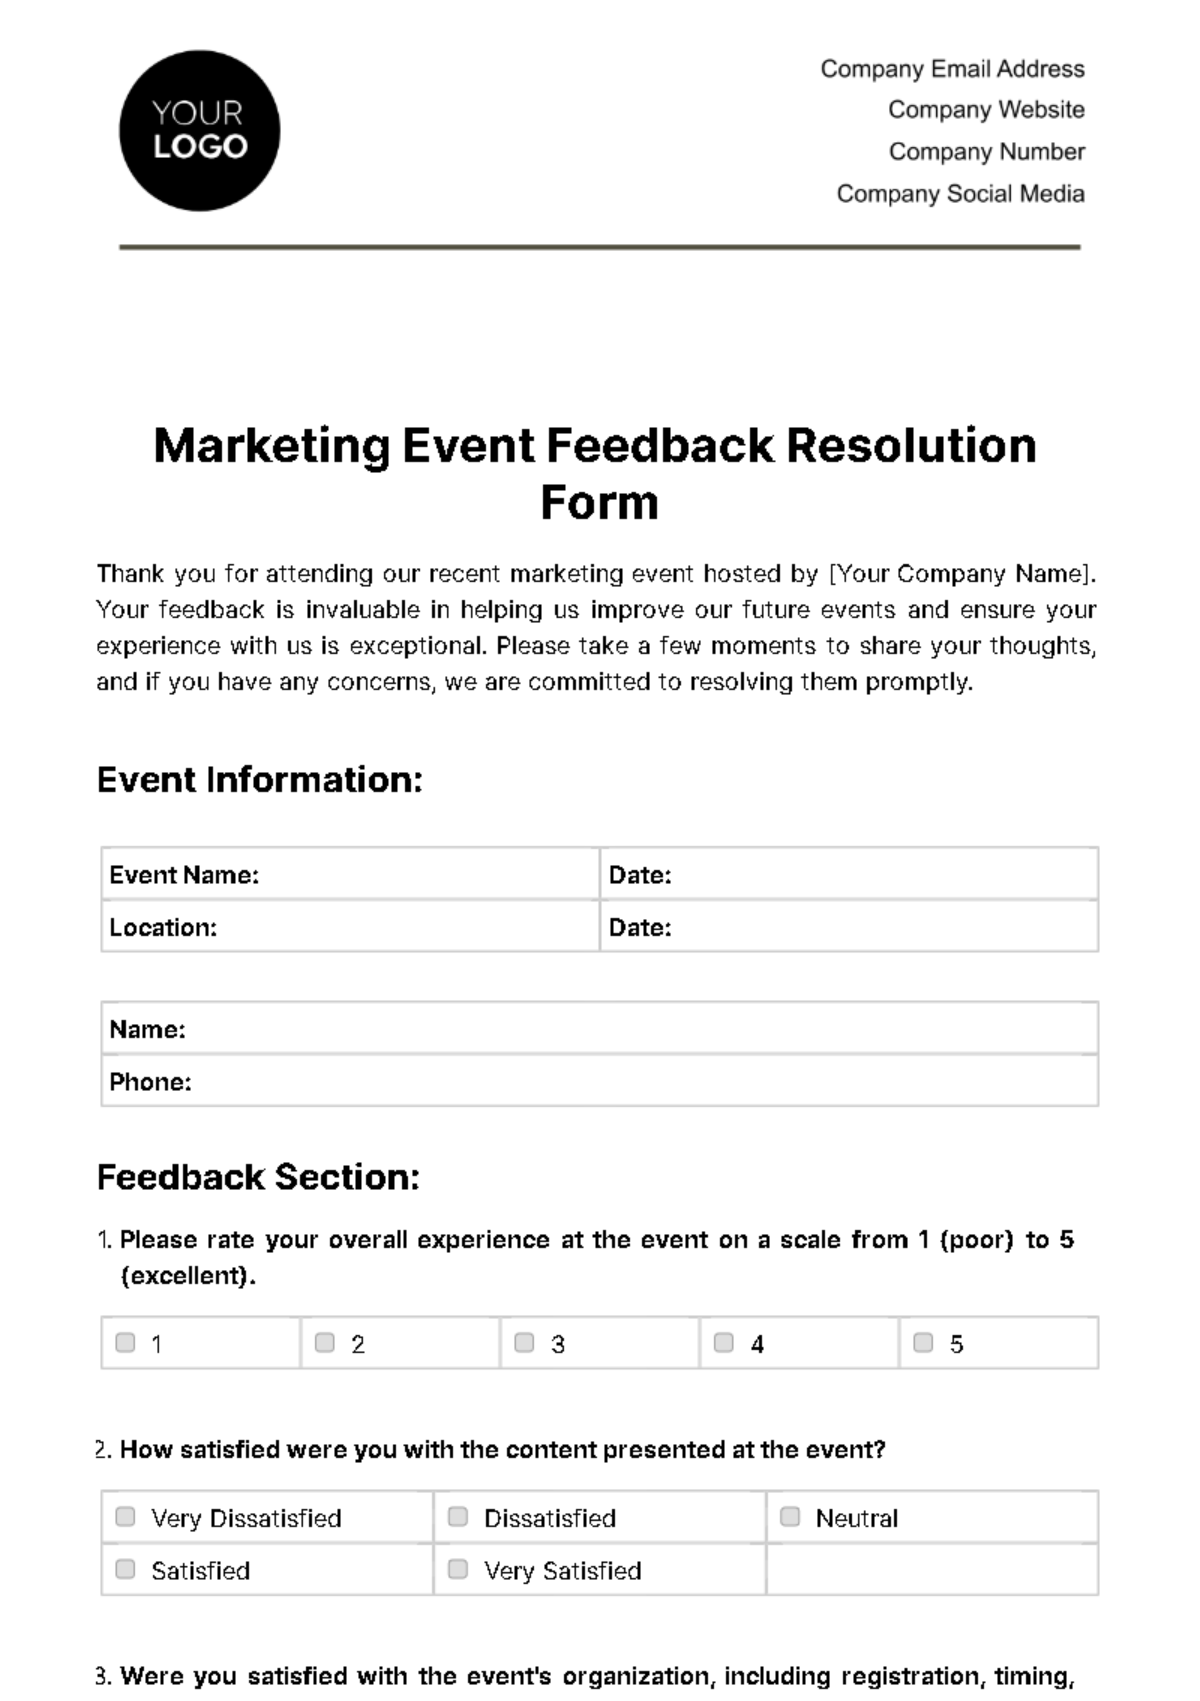 Free Marketing Event Feedback Resolution Form Template